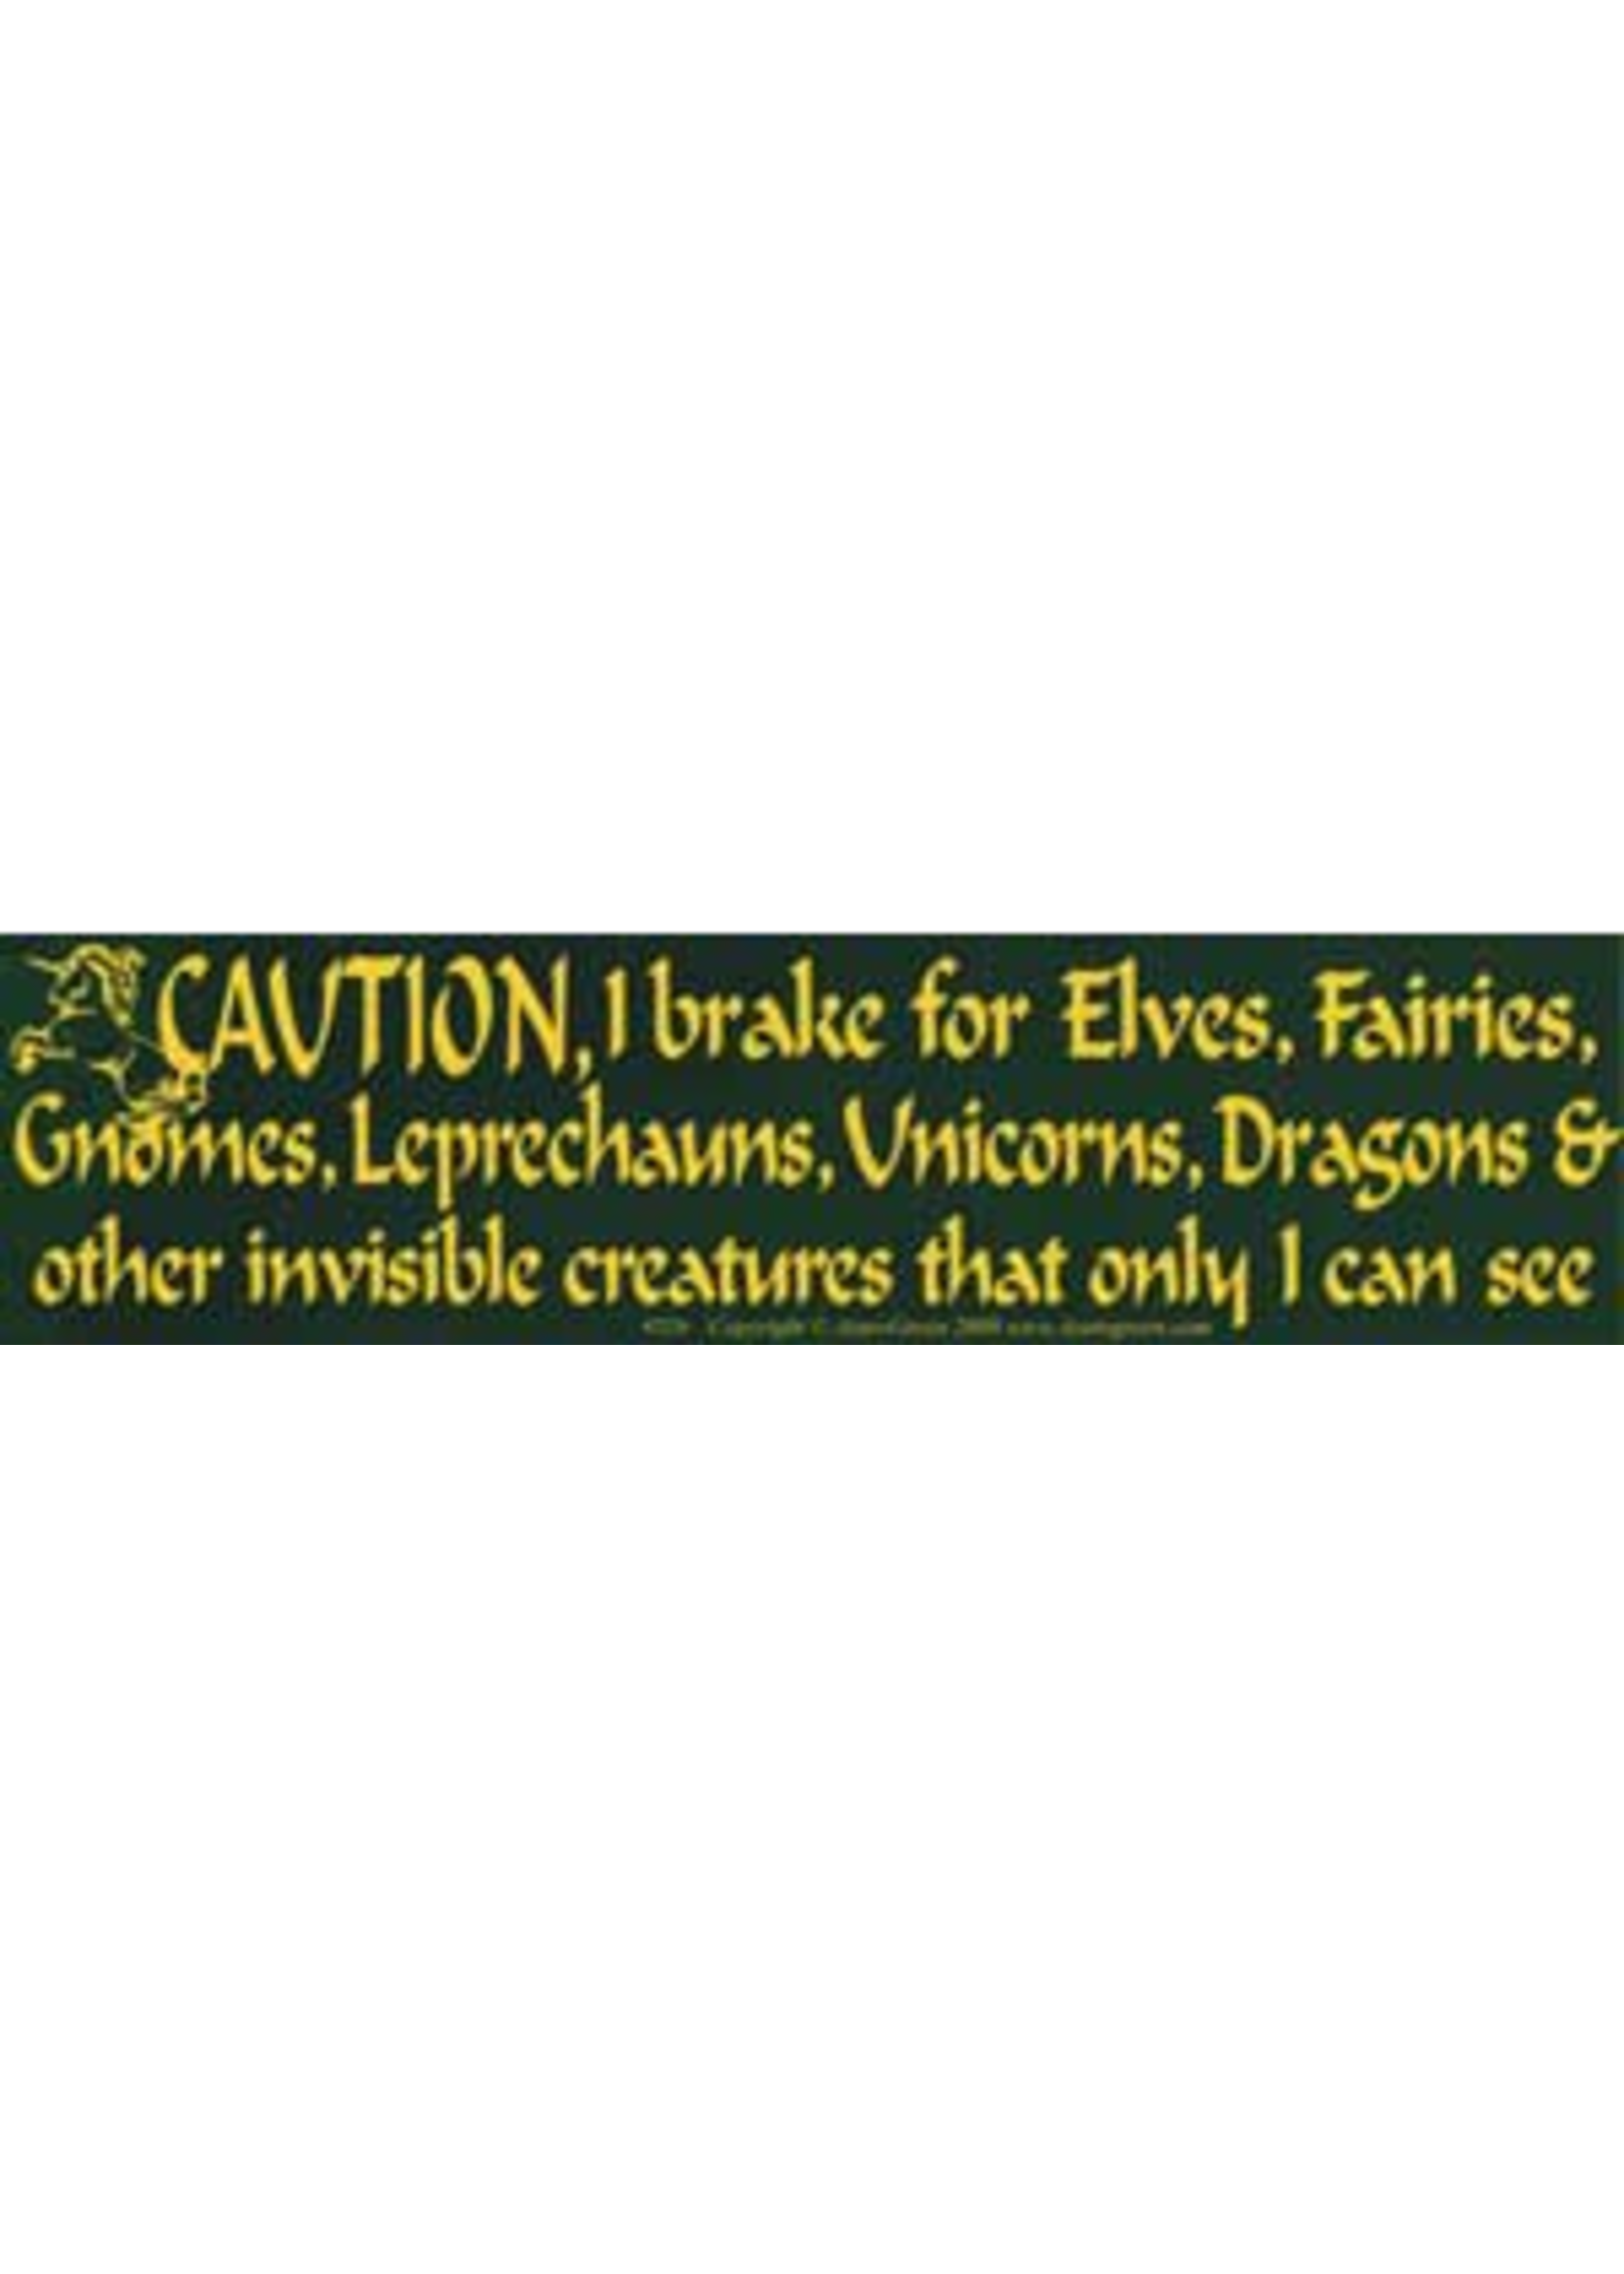 BUMP: Caution I Brake for Elves, Fairies...and Other invisible creatures only I can see (016)